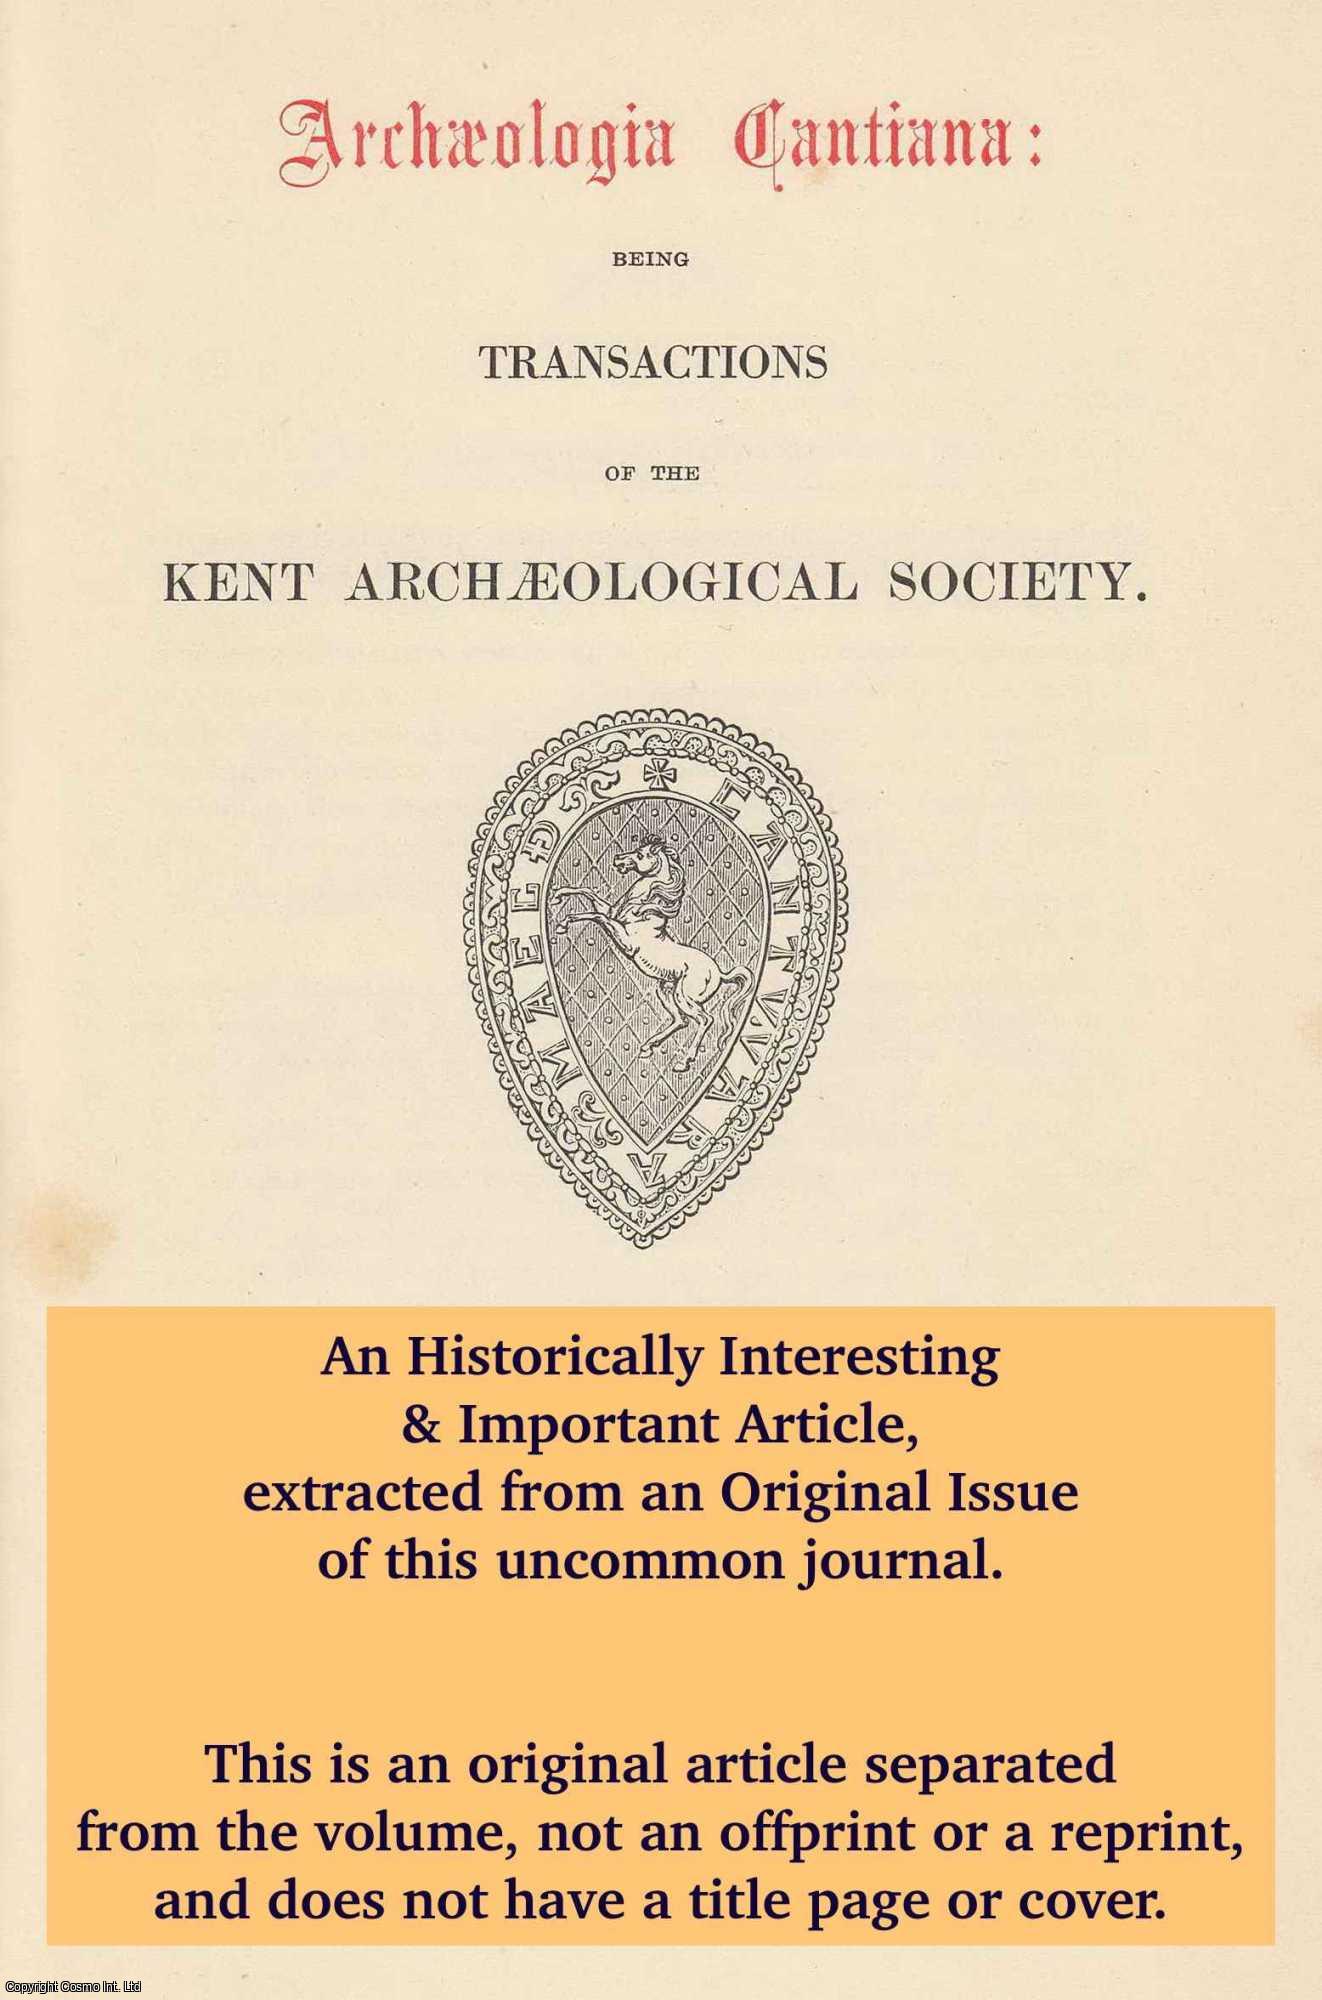 C. Roach Smith - On a Hoard of Roman Coins Discovered in Cobham Park. An original article from The Archaeologia Cantiana: Transactions of The Kent Archaeological Society, 1883.